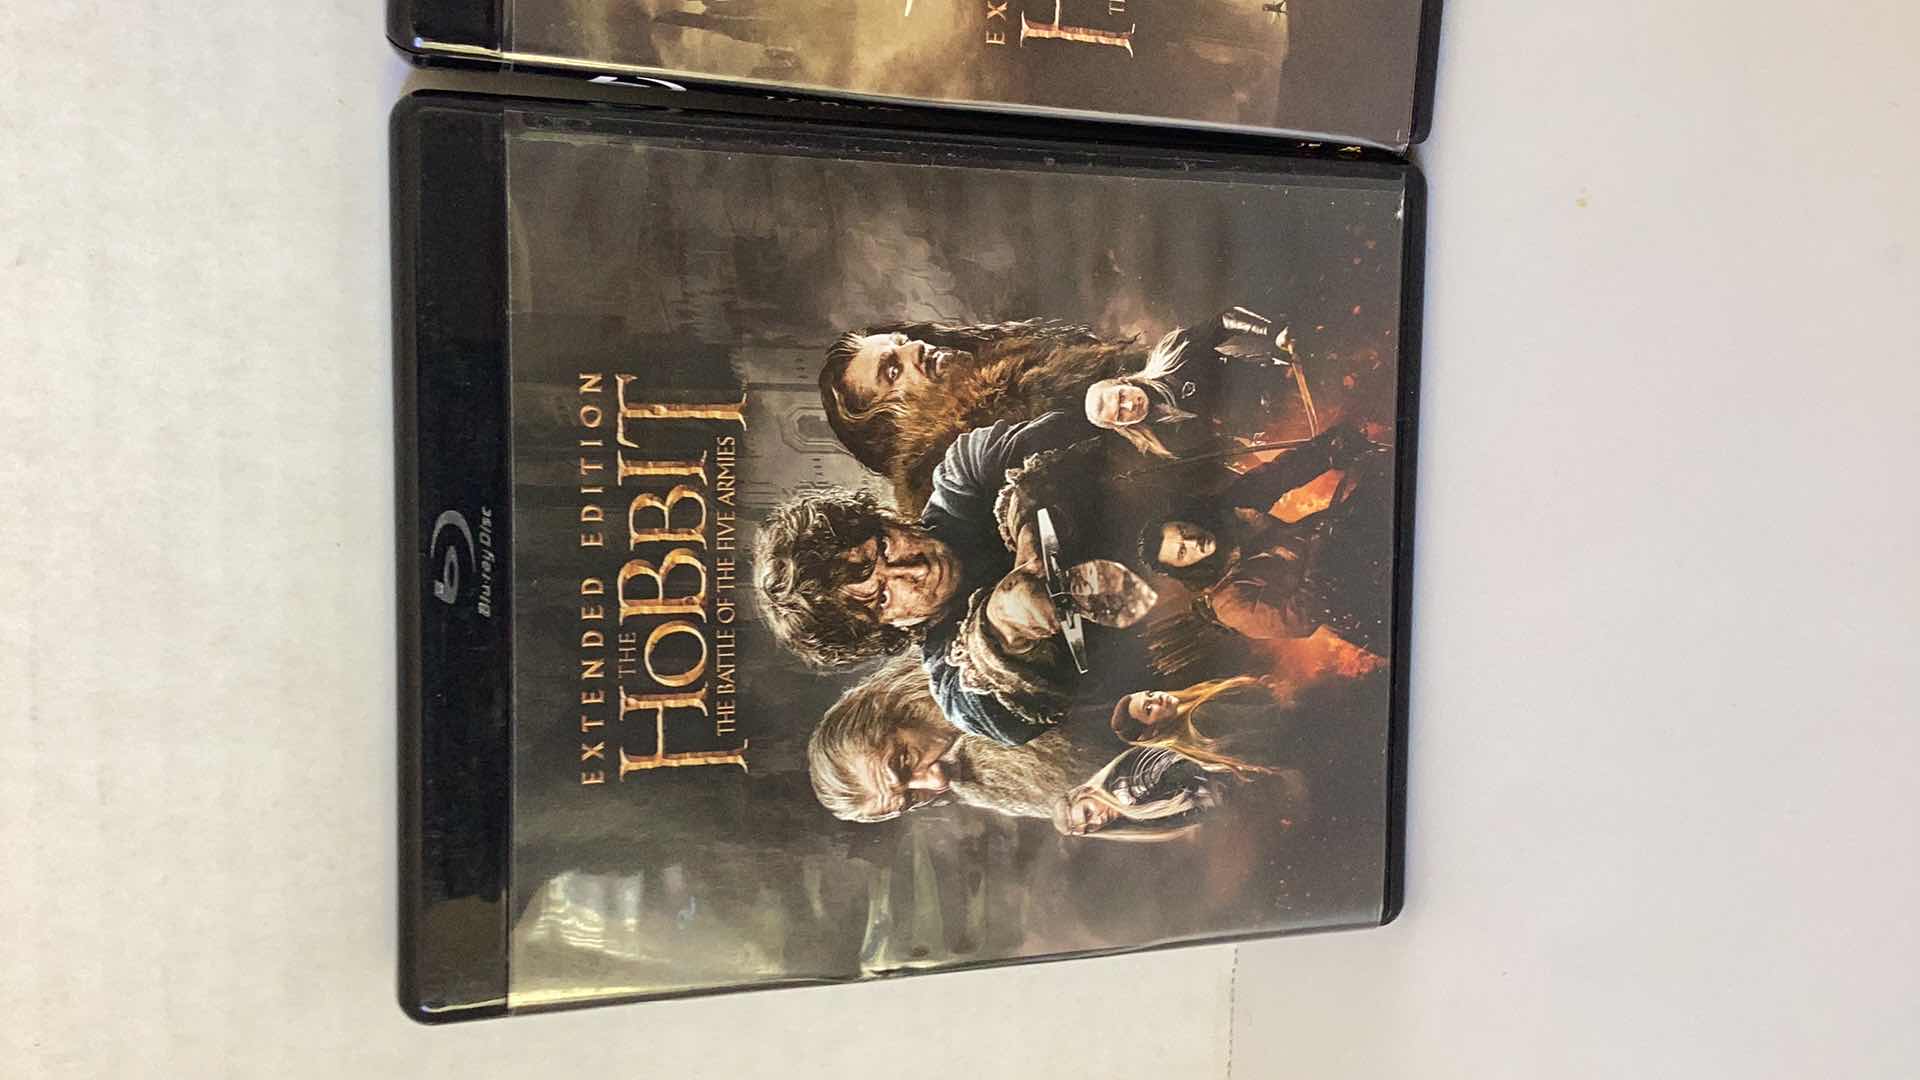 Photo 2 of 3 EXTENDED EDITION HOBBIT MOVIES